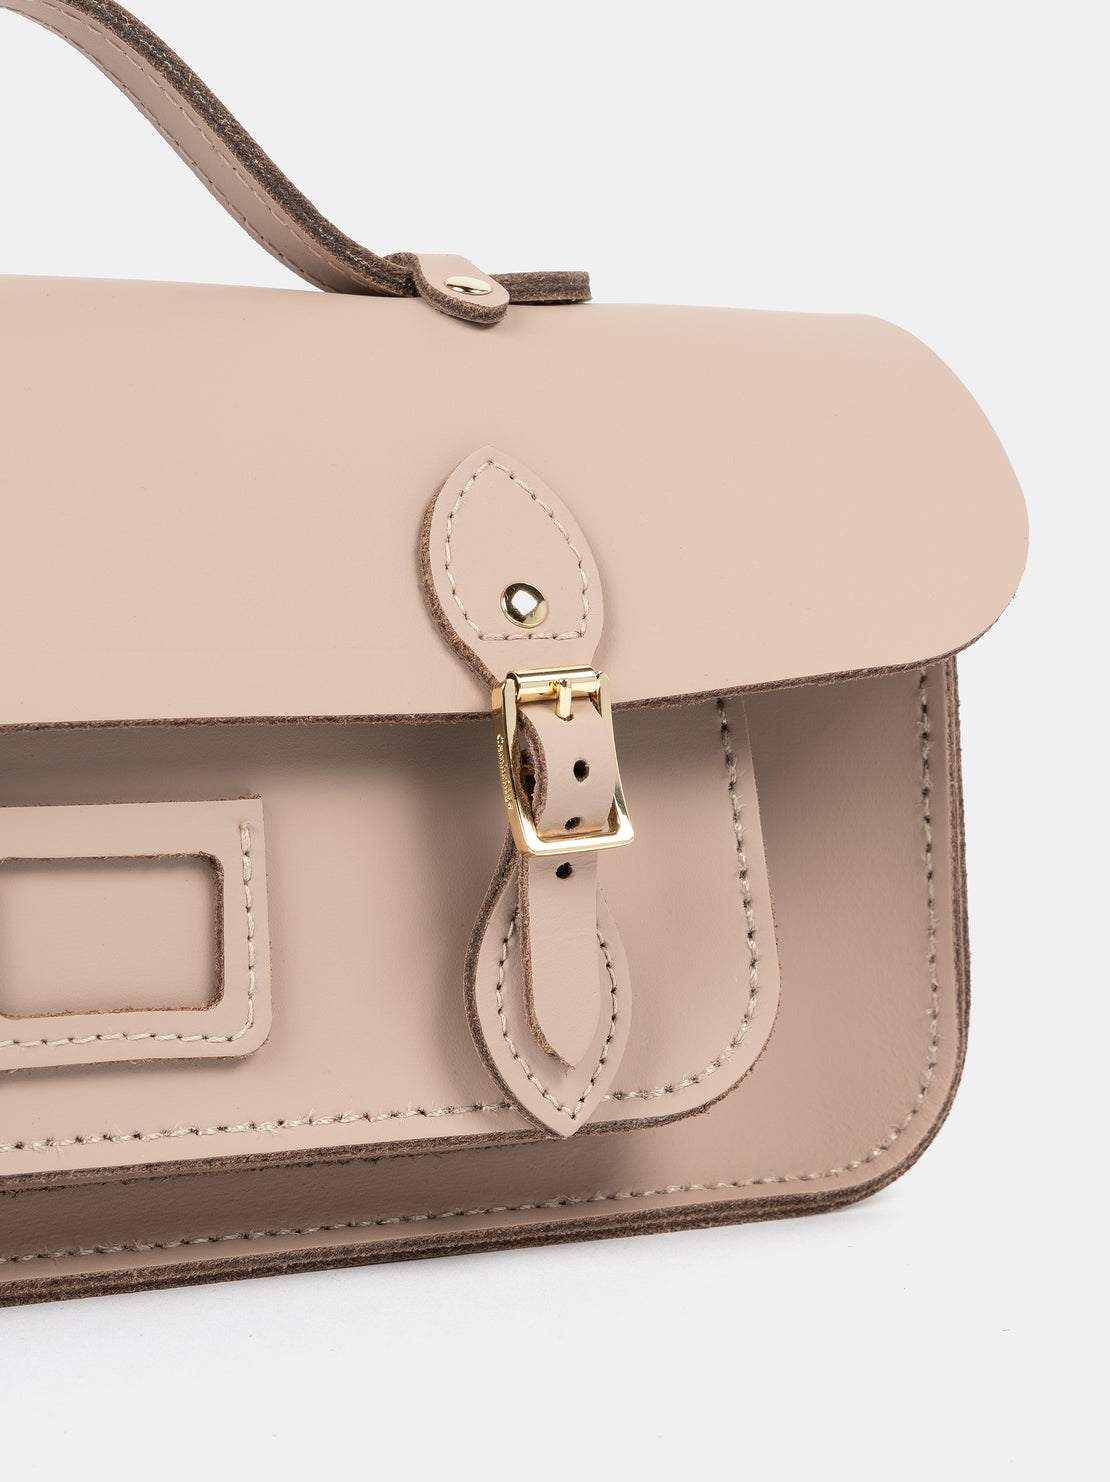 Detail Shot of Long Leather Satchel with Magnetic Closure in Biscuit